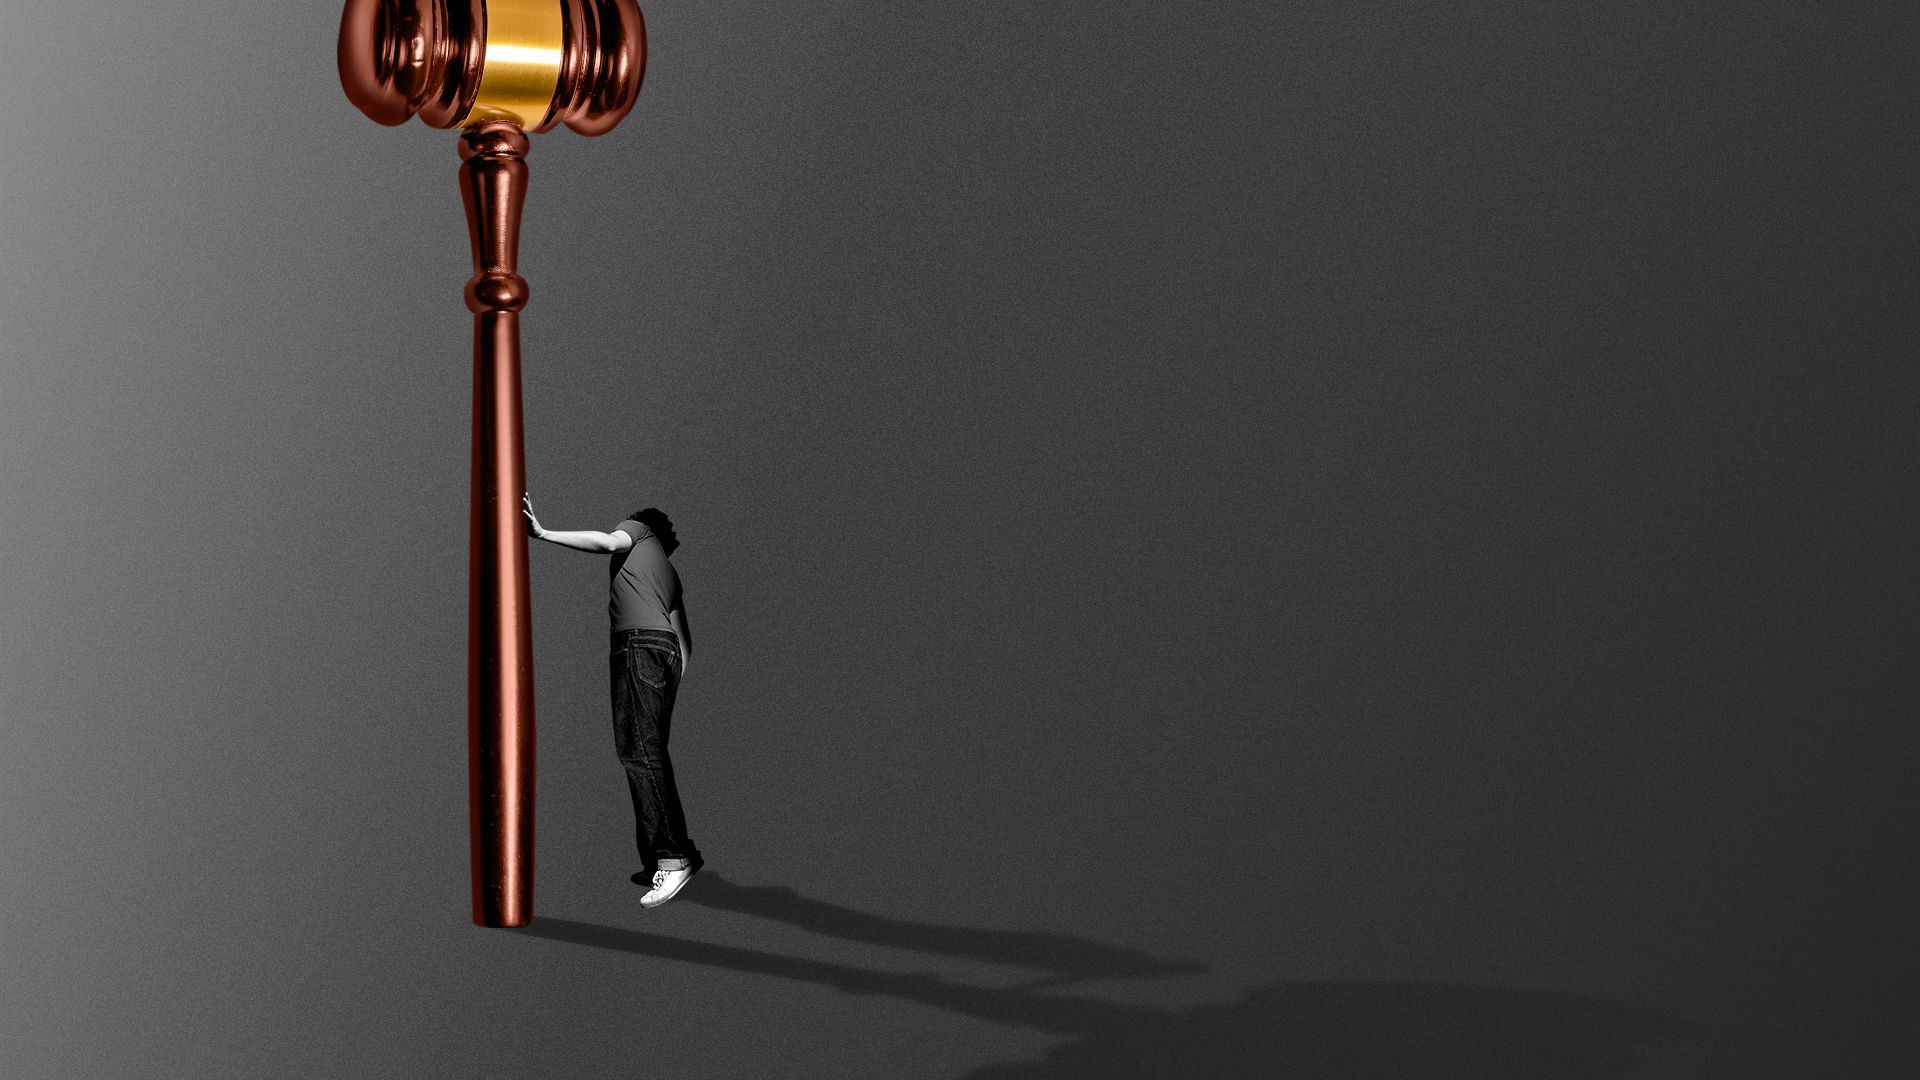 Illustration of a person standing behind a gavel and peering around the corner as if taking shelter.